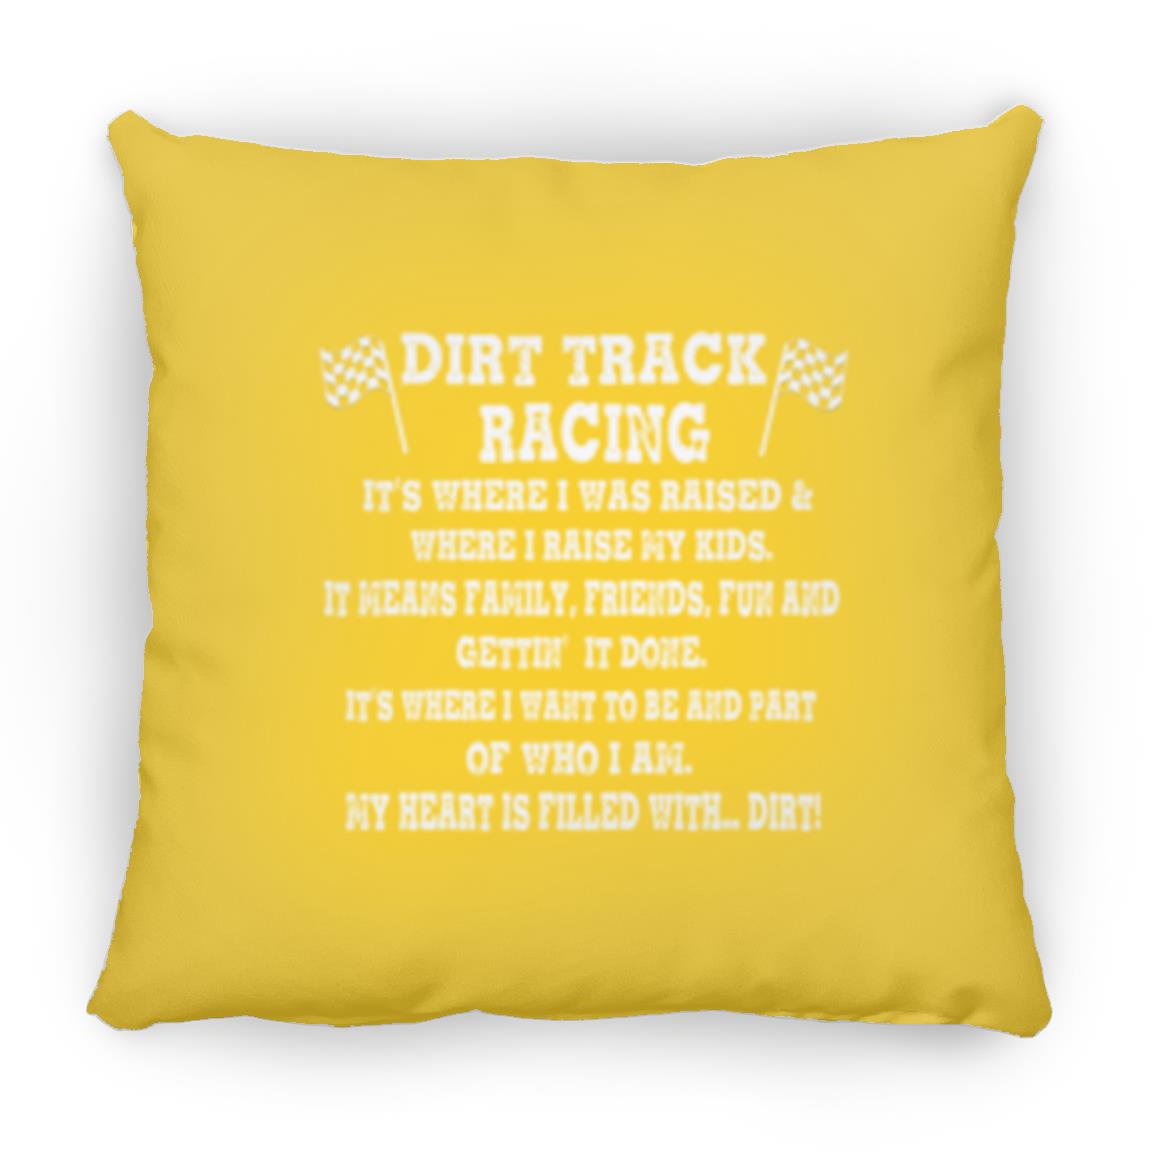 Dirt Track Racing It's Where I Was Raised Medium Square Pillow